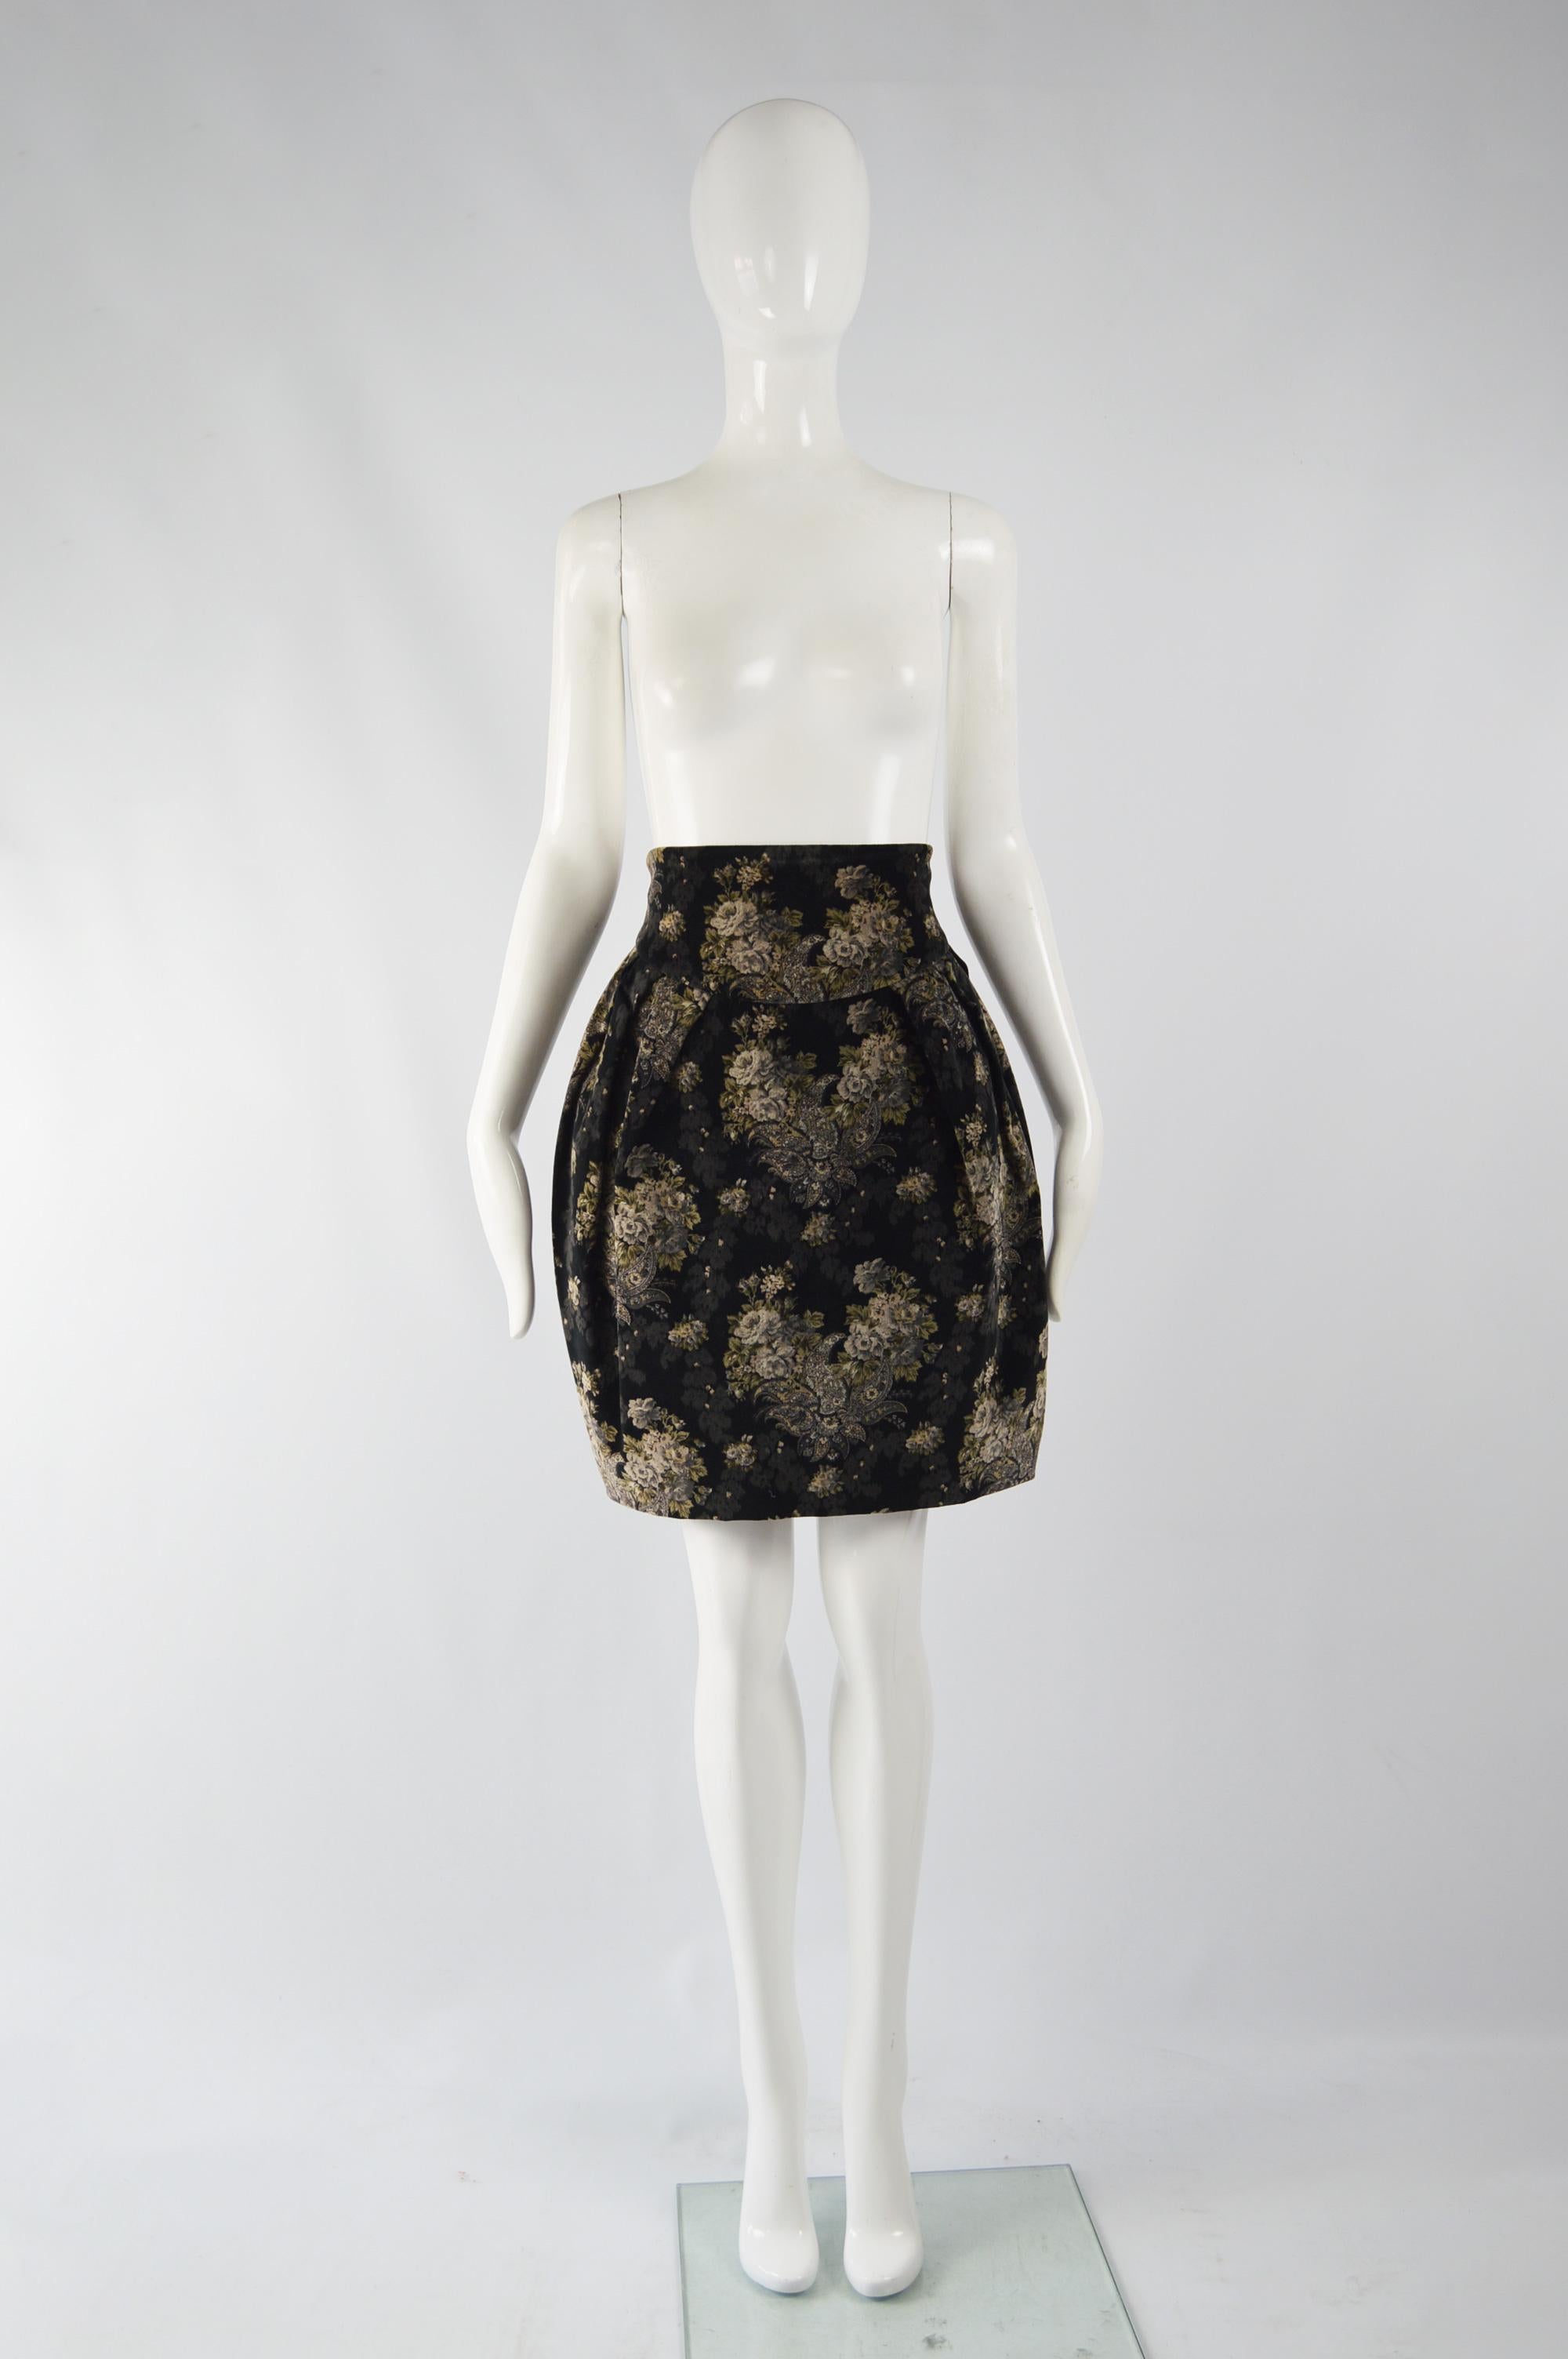 A chic vintage women's skirt from the 80s by luxury Italian fashion house Byblos (who Gianni Versace was once a creative director of). In a black velvet with a grey and beige floral pattern throughout and an ultra high waist that contrasts with the